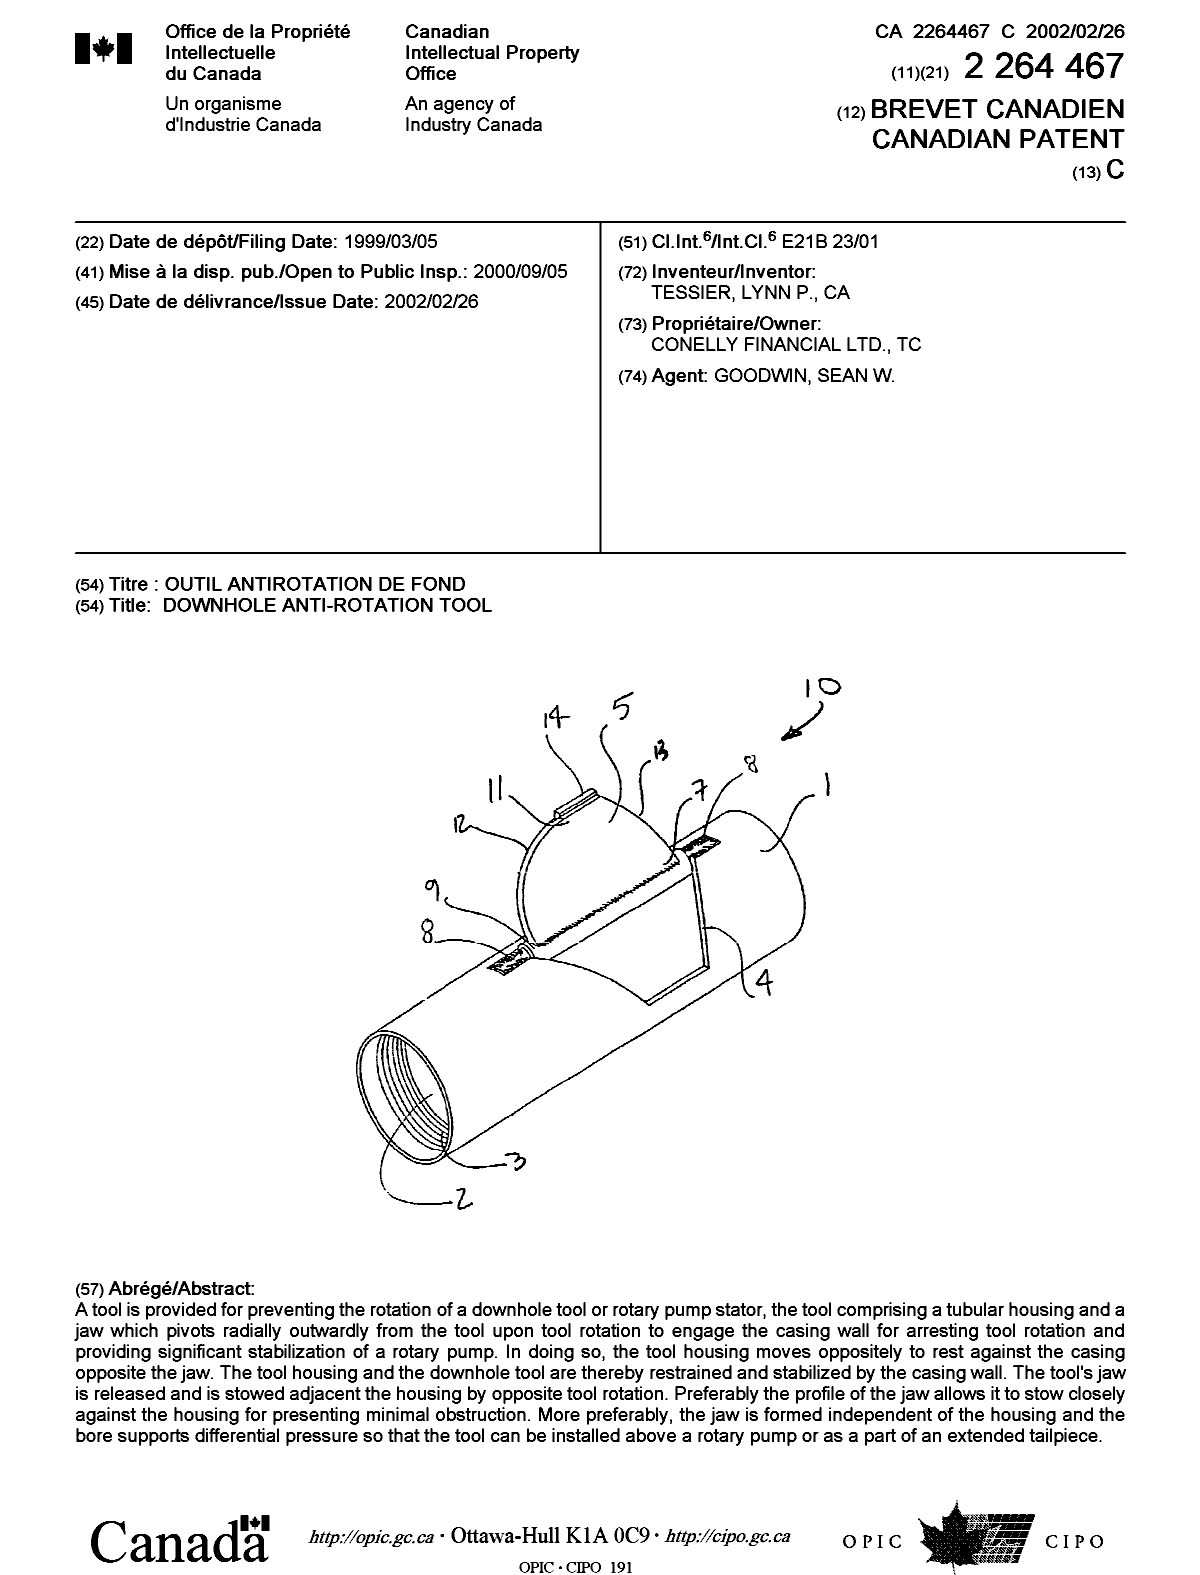 Canadian Patent Document 2264467. Cover Page 20011224. Image 1 of 1